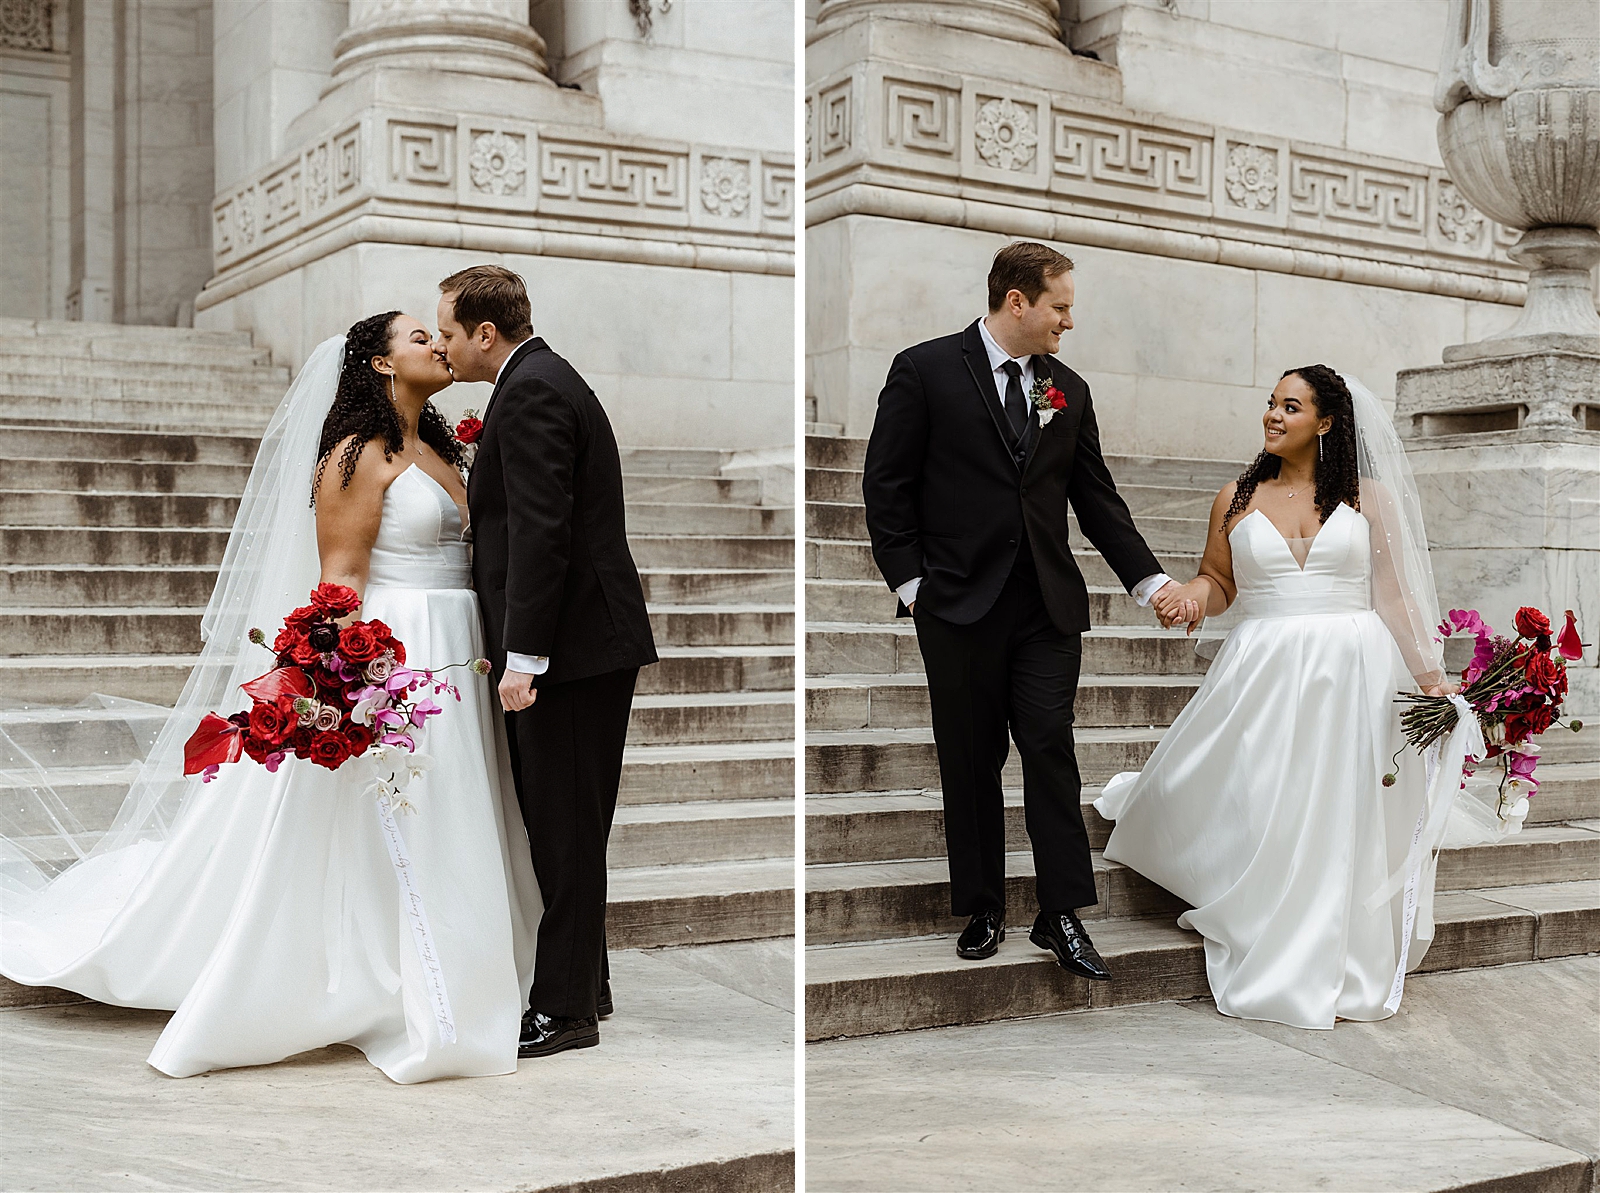 Left photo: Bride and Groom share a kiss on the New York Public Library steps.
Right photo: Bride and Groom smile at each other as they walk down the New York Public Library steps hand in hand. 